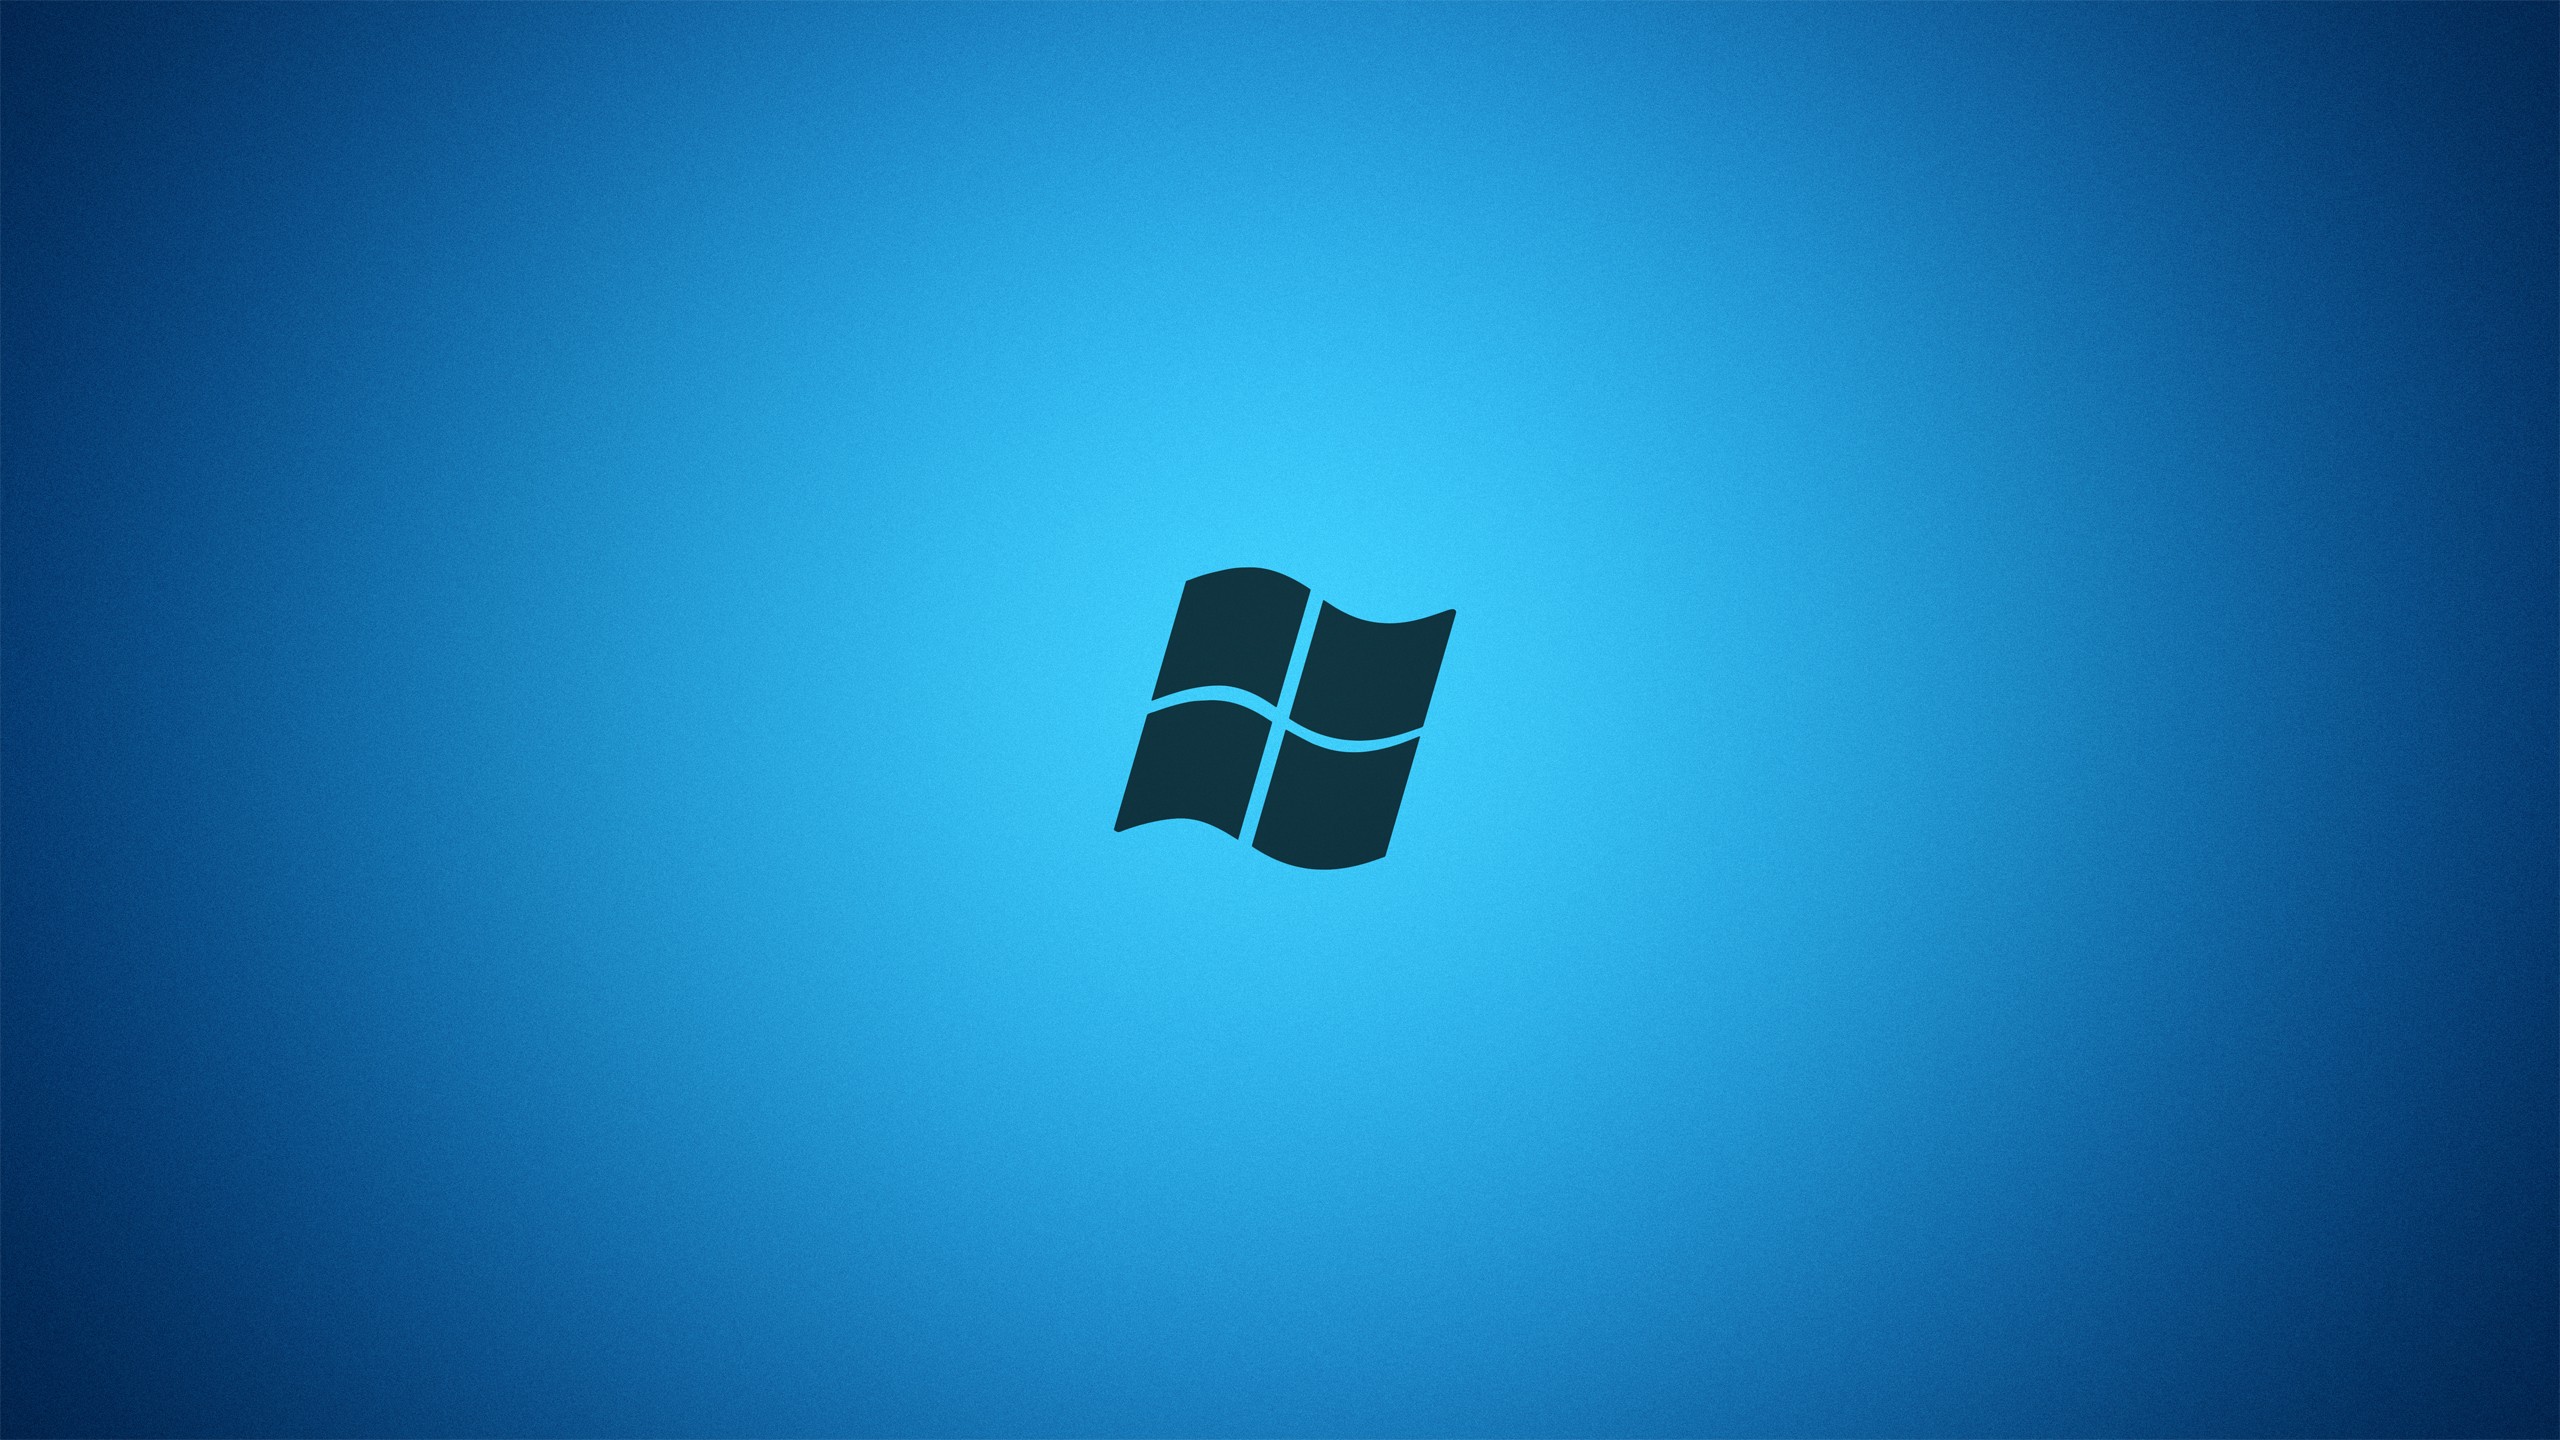 2560x1600px : Windows Wallpapers